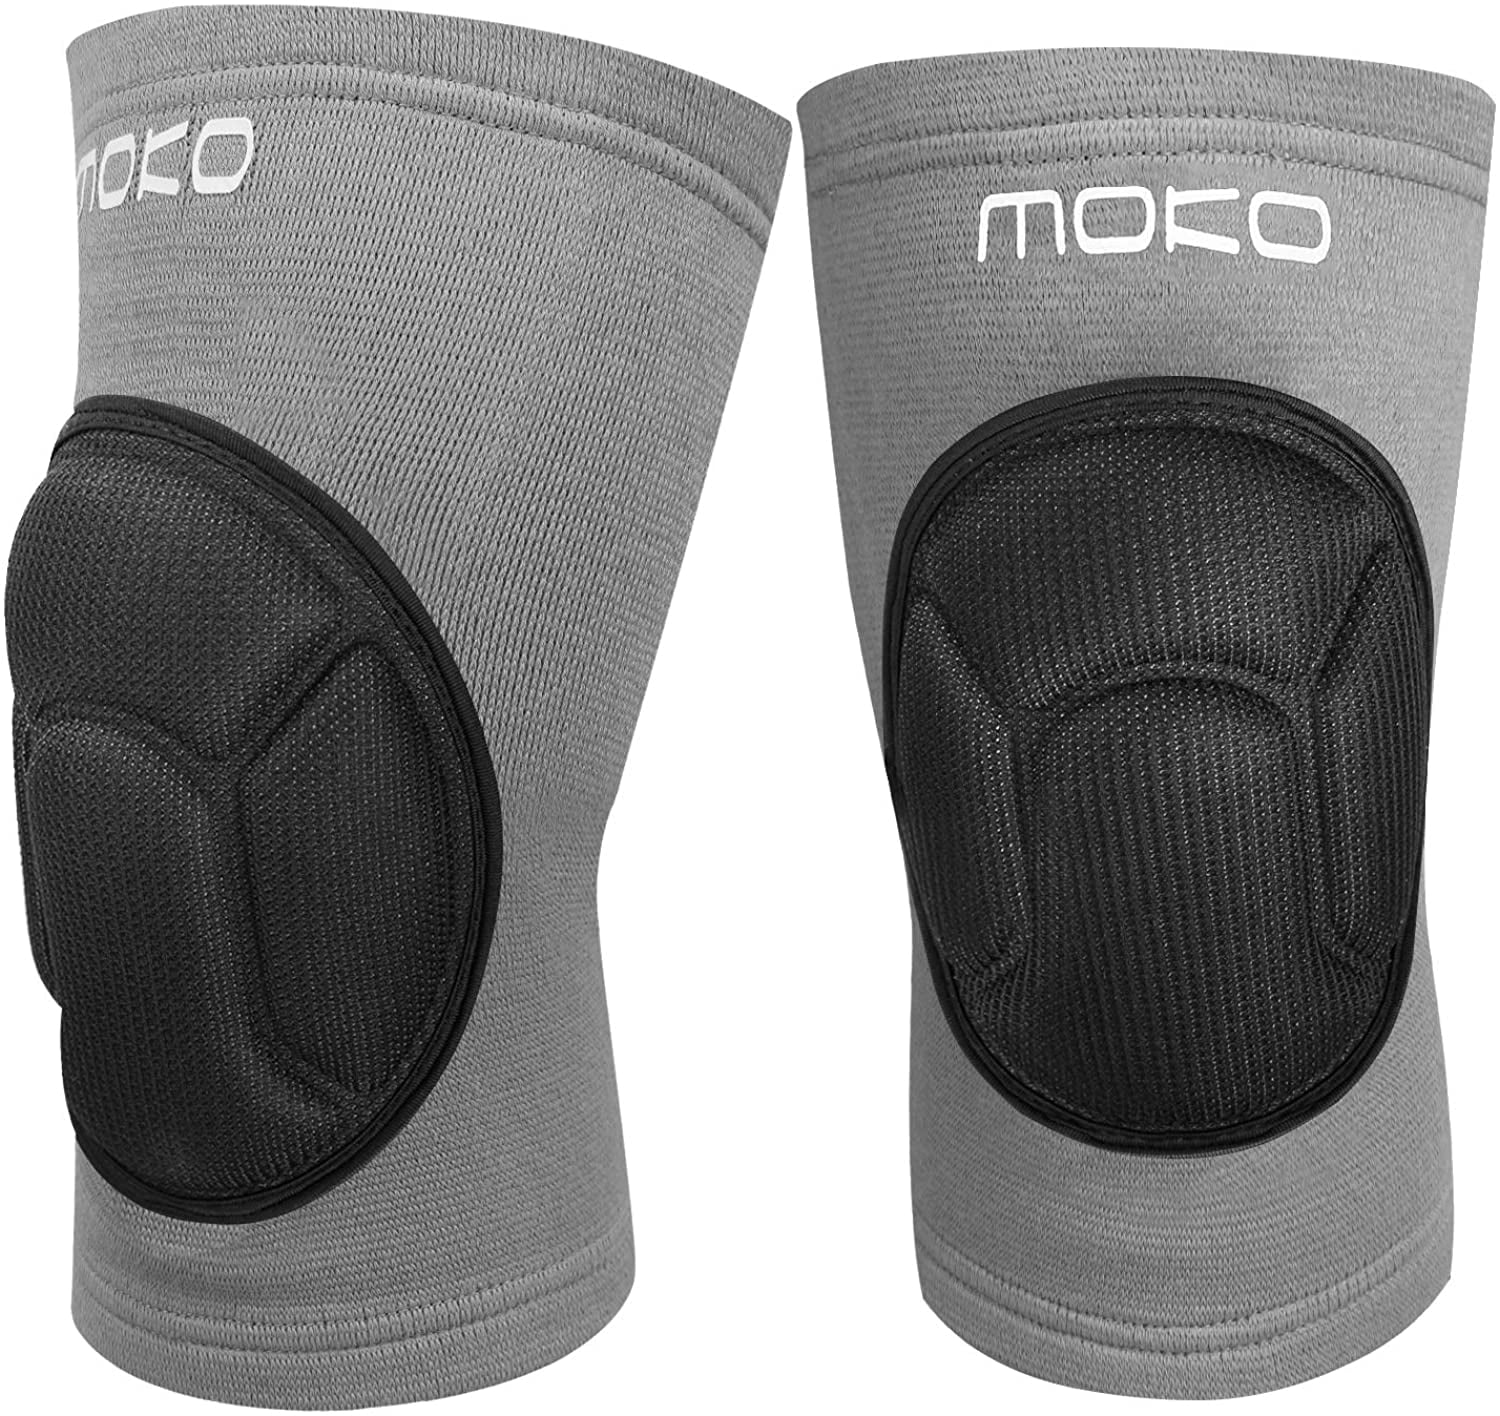 MoKo 2 Pack Knee Brace Basketball Volleyball Volleyball Knee Pads for Women Men Knee Support Professional Compression Knee Sleeves for Dance Runining 